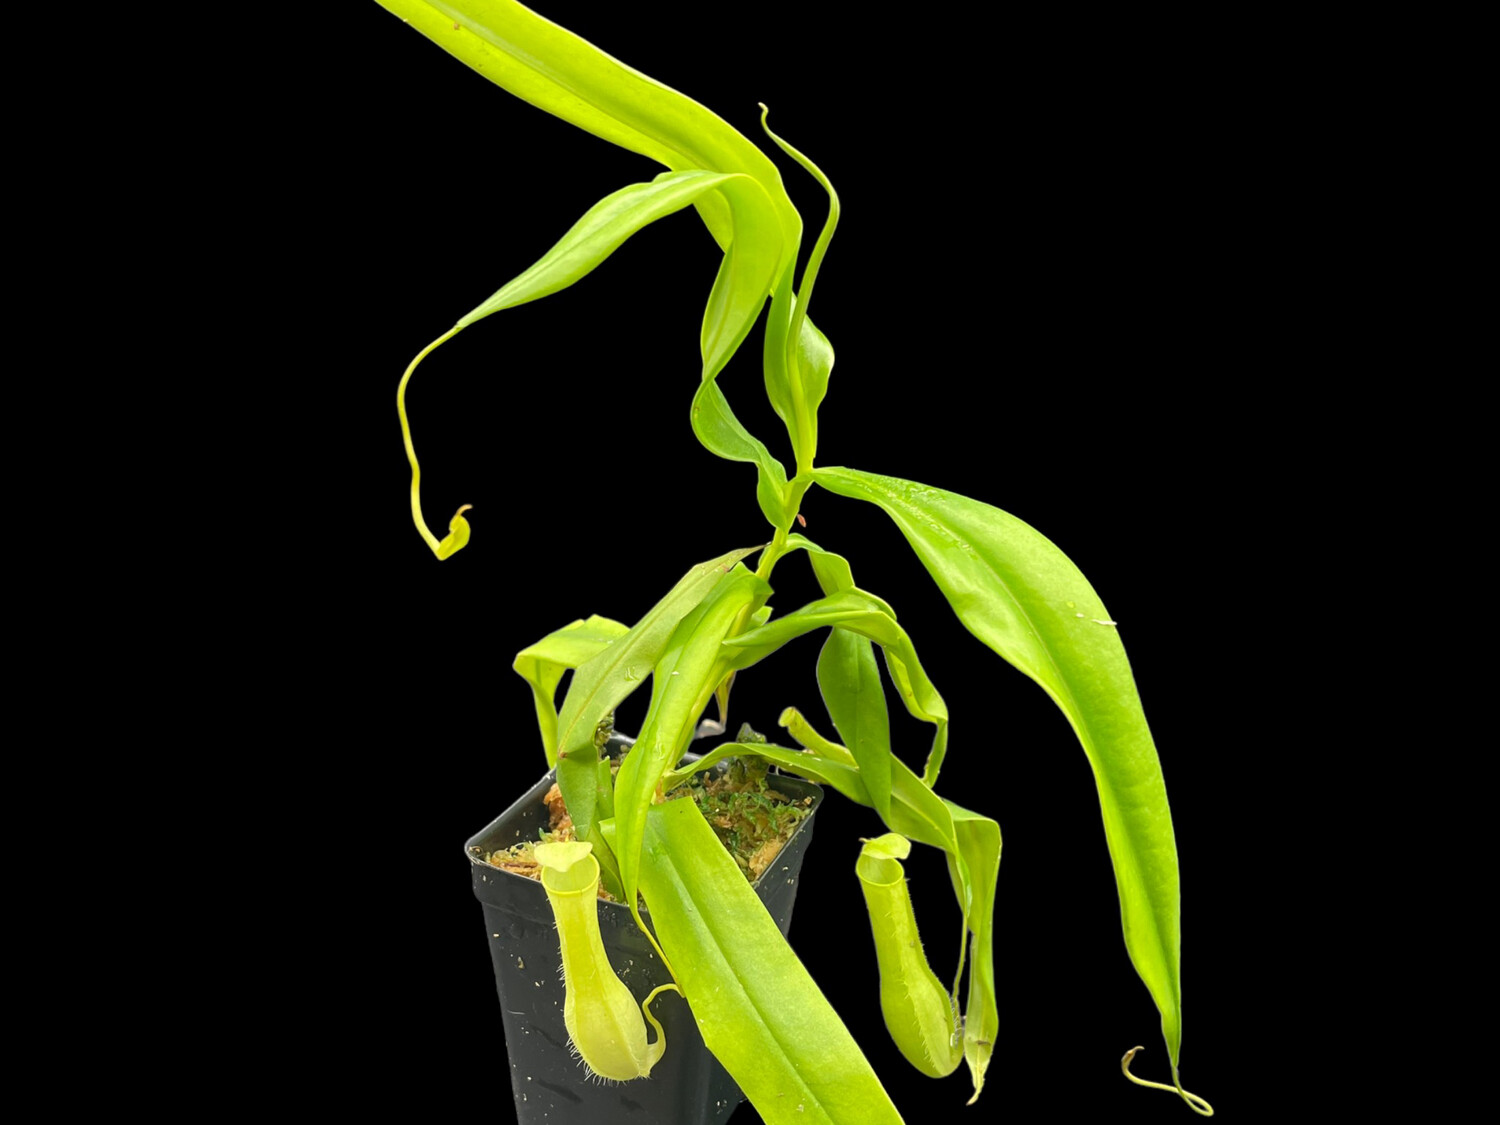 Nepenthes gracilis  “All Green” - Large WYSIWYG 